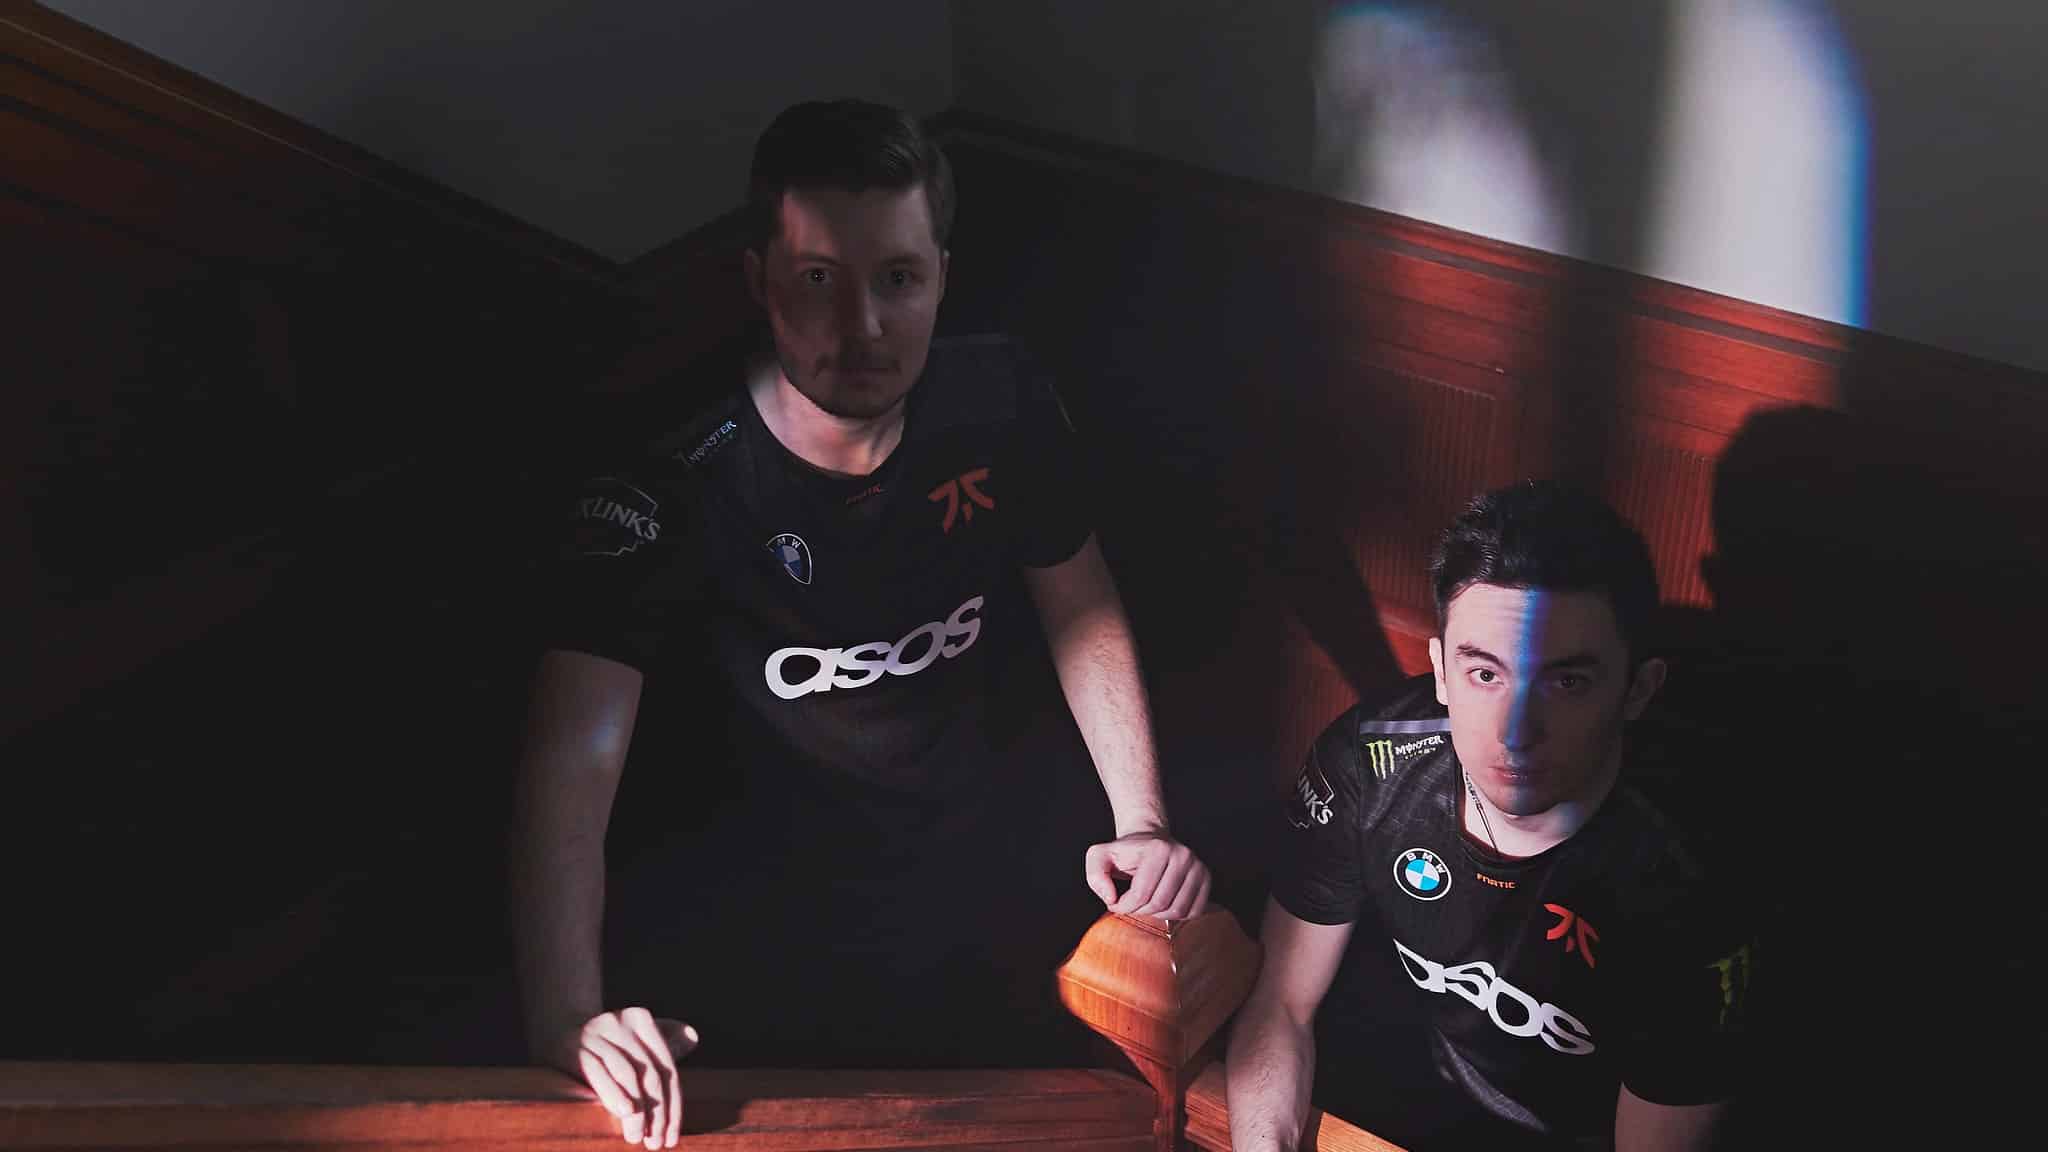 H1ber and Enzo stand and pose on a staircase in Fnatic jerseys. 